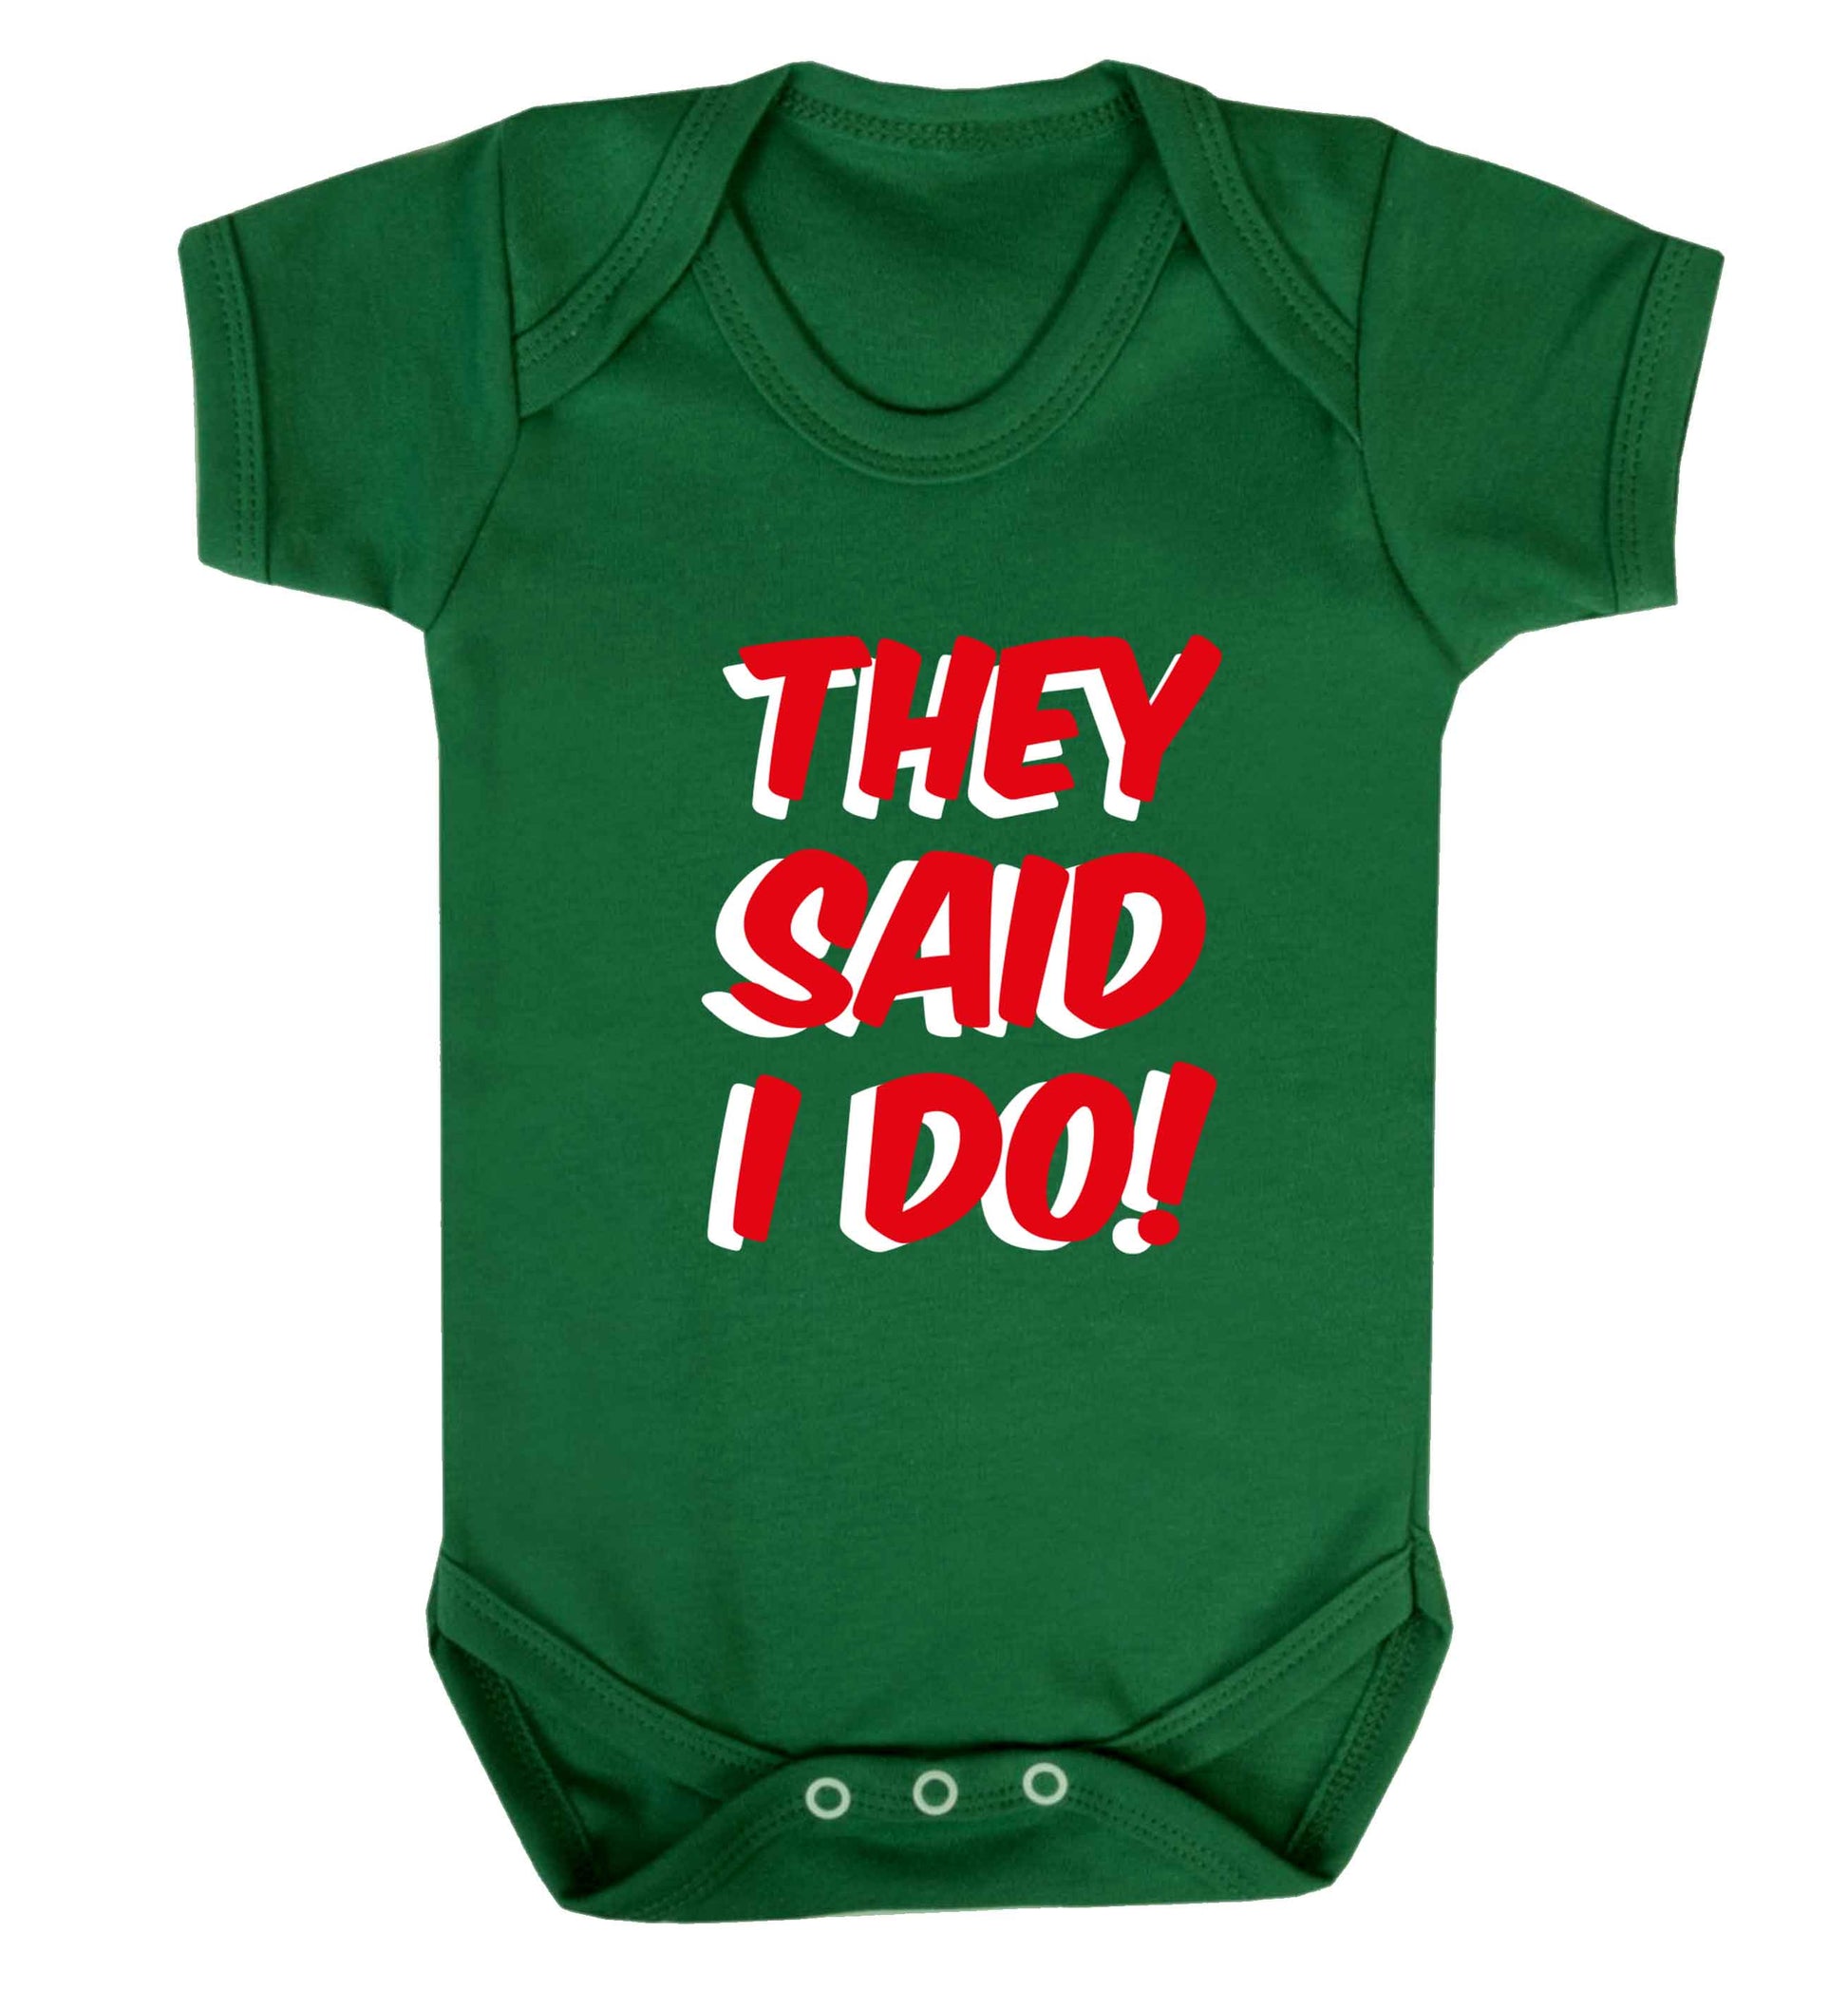 They said I do baby vest green 18-24 months